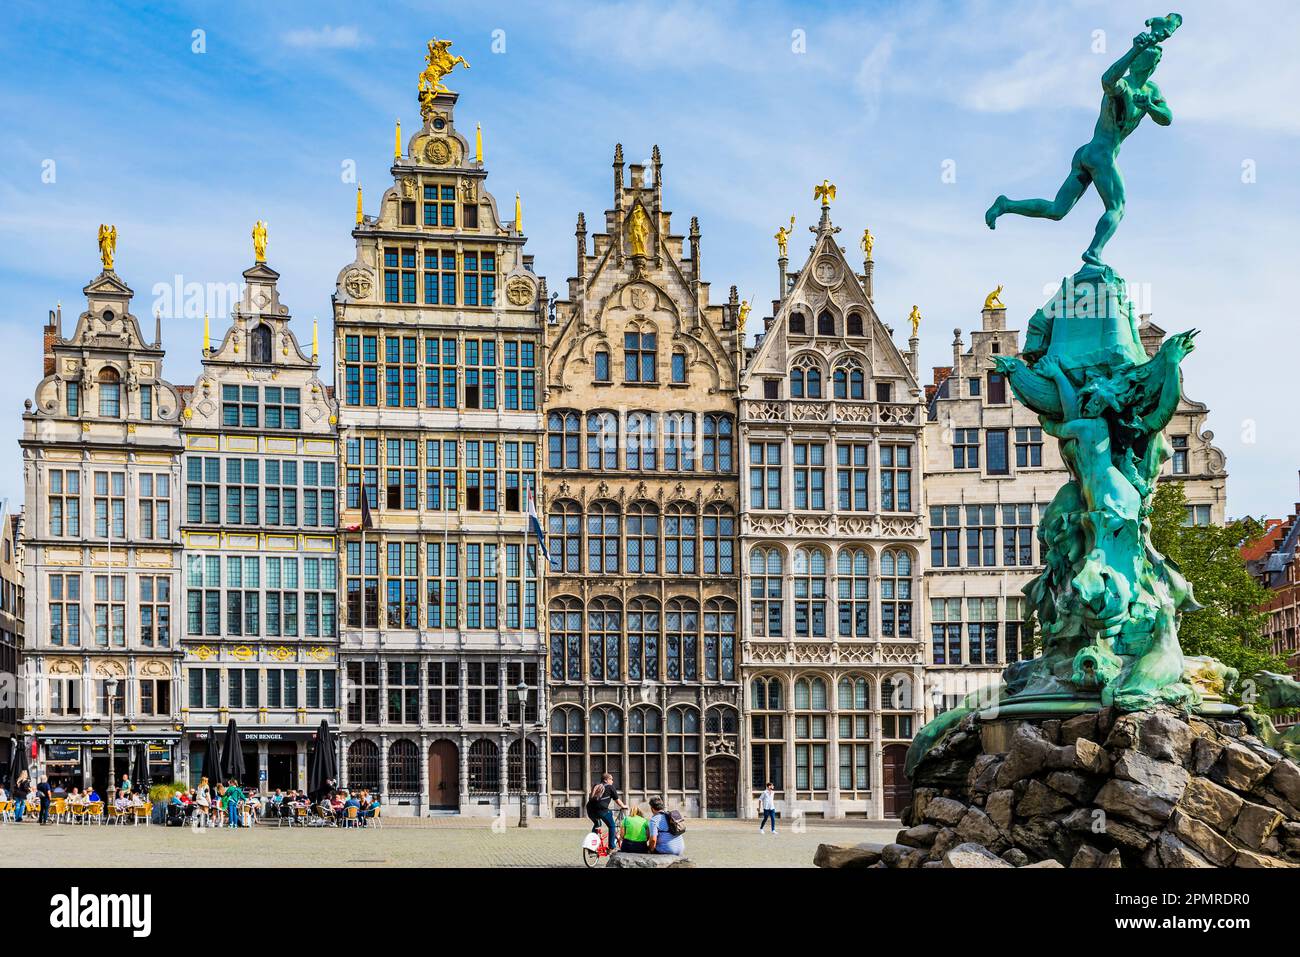 Guild houses in the Grote Markt with the Brabo Fountain. Guild Houses in Grote Markt, is a row of guild houses initially built around 1580. During the Stock Photo